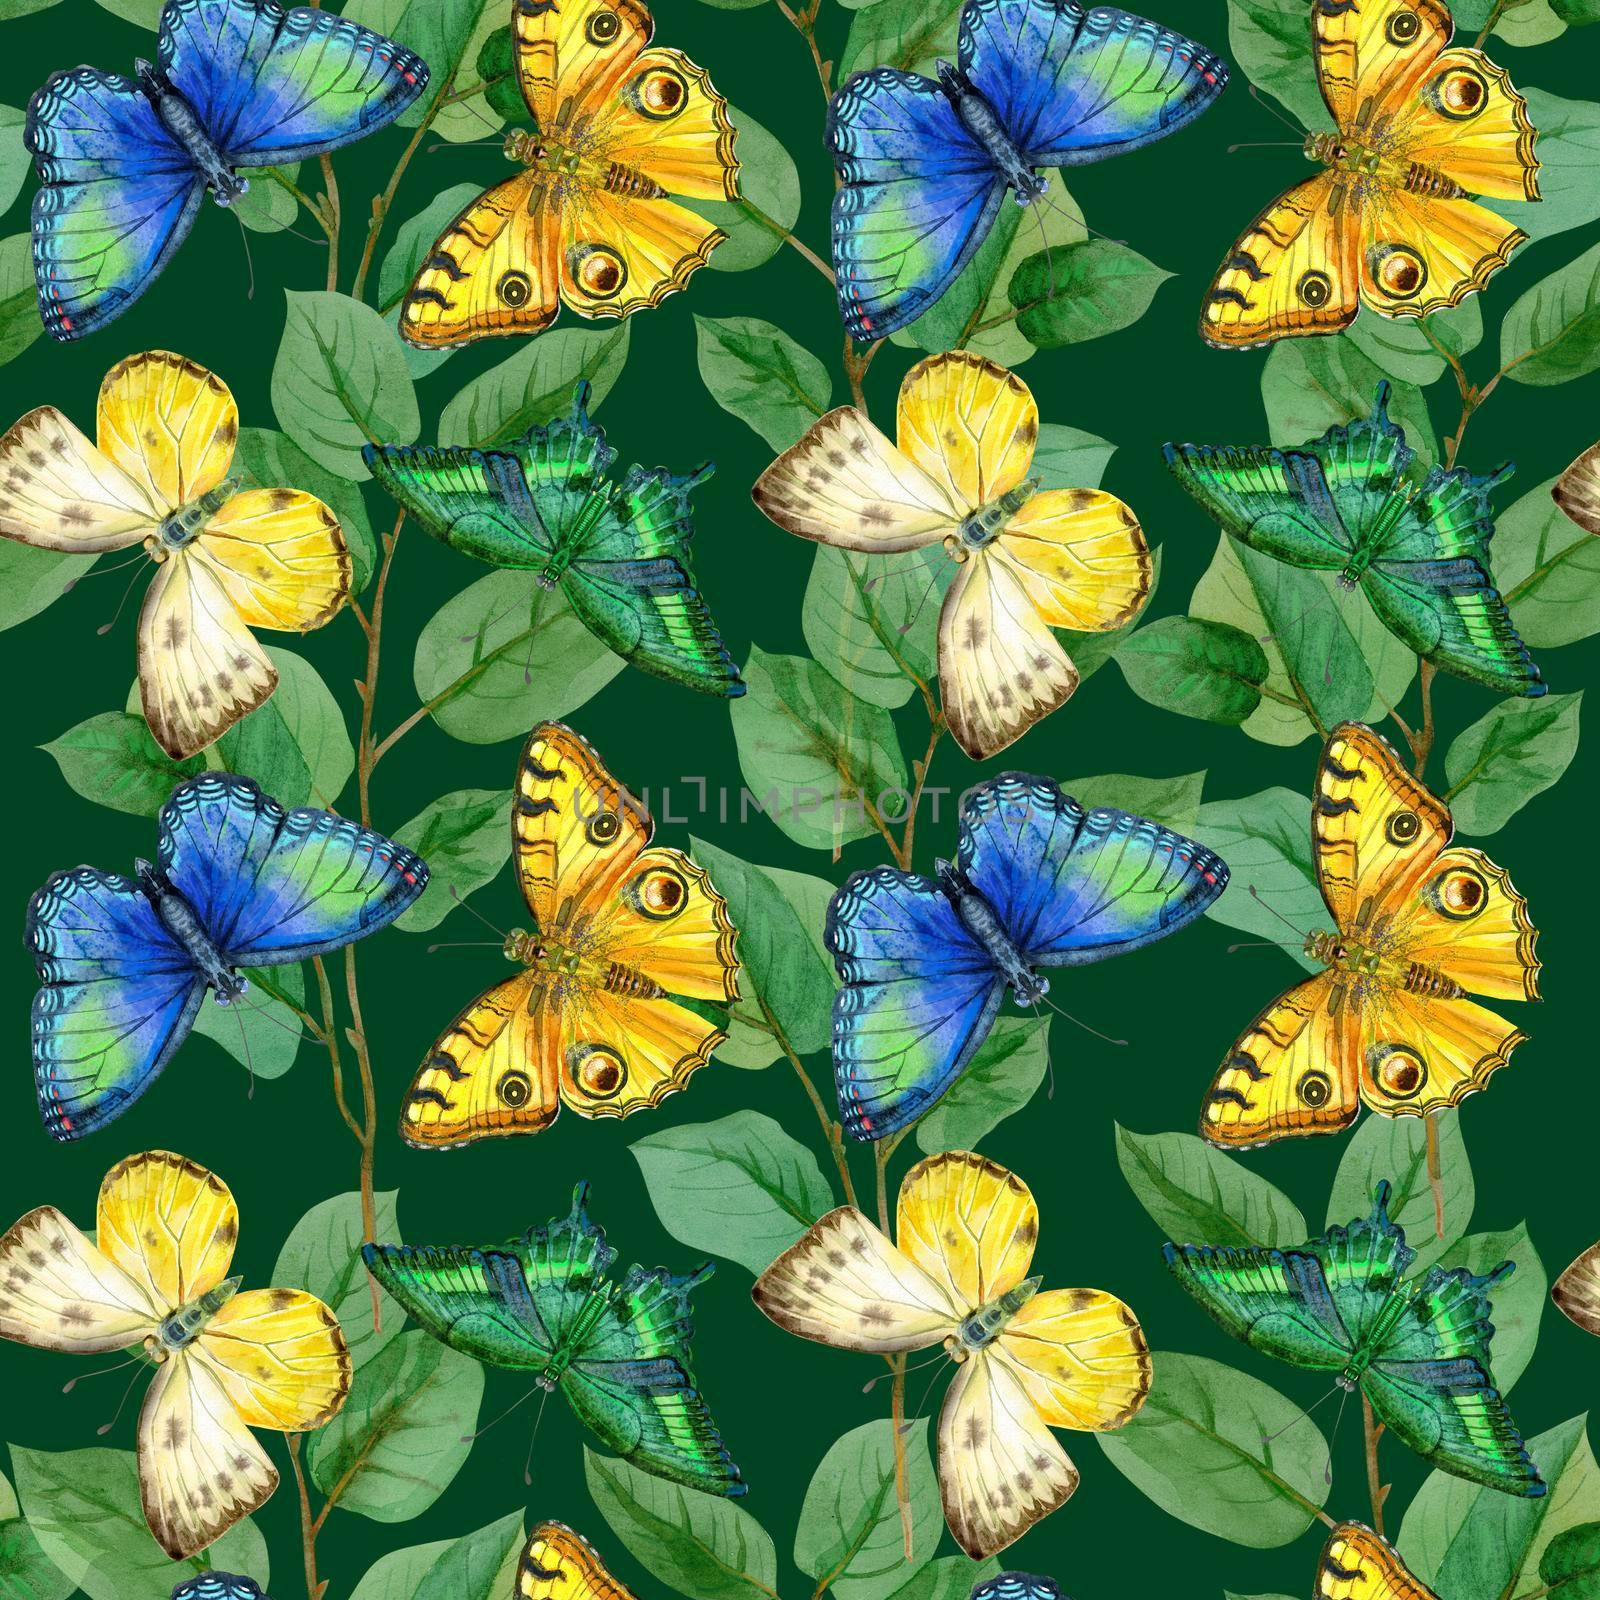 Floral leaves seamless pattern with colorful butterflies on dark green background. Artistic design for floral print for packaging, textile, wallpaper, gift wrap, greeting or wedding background.